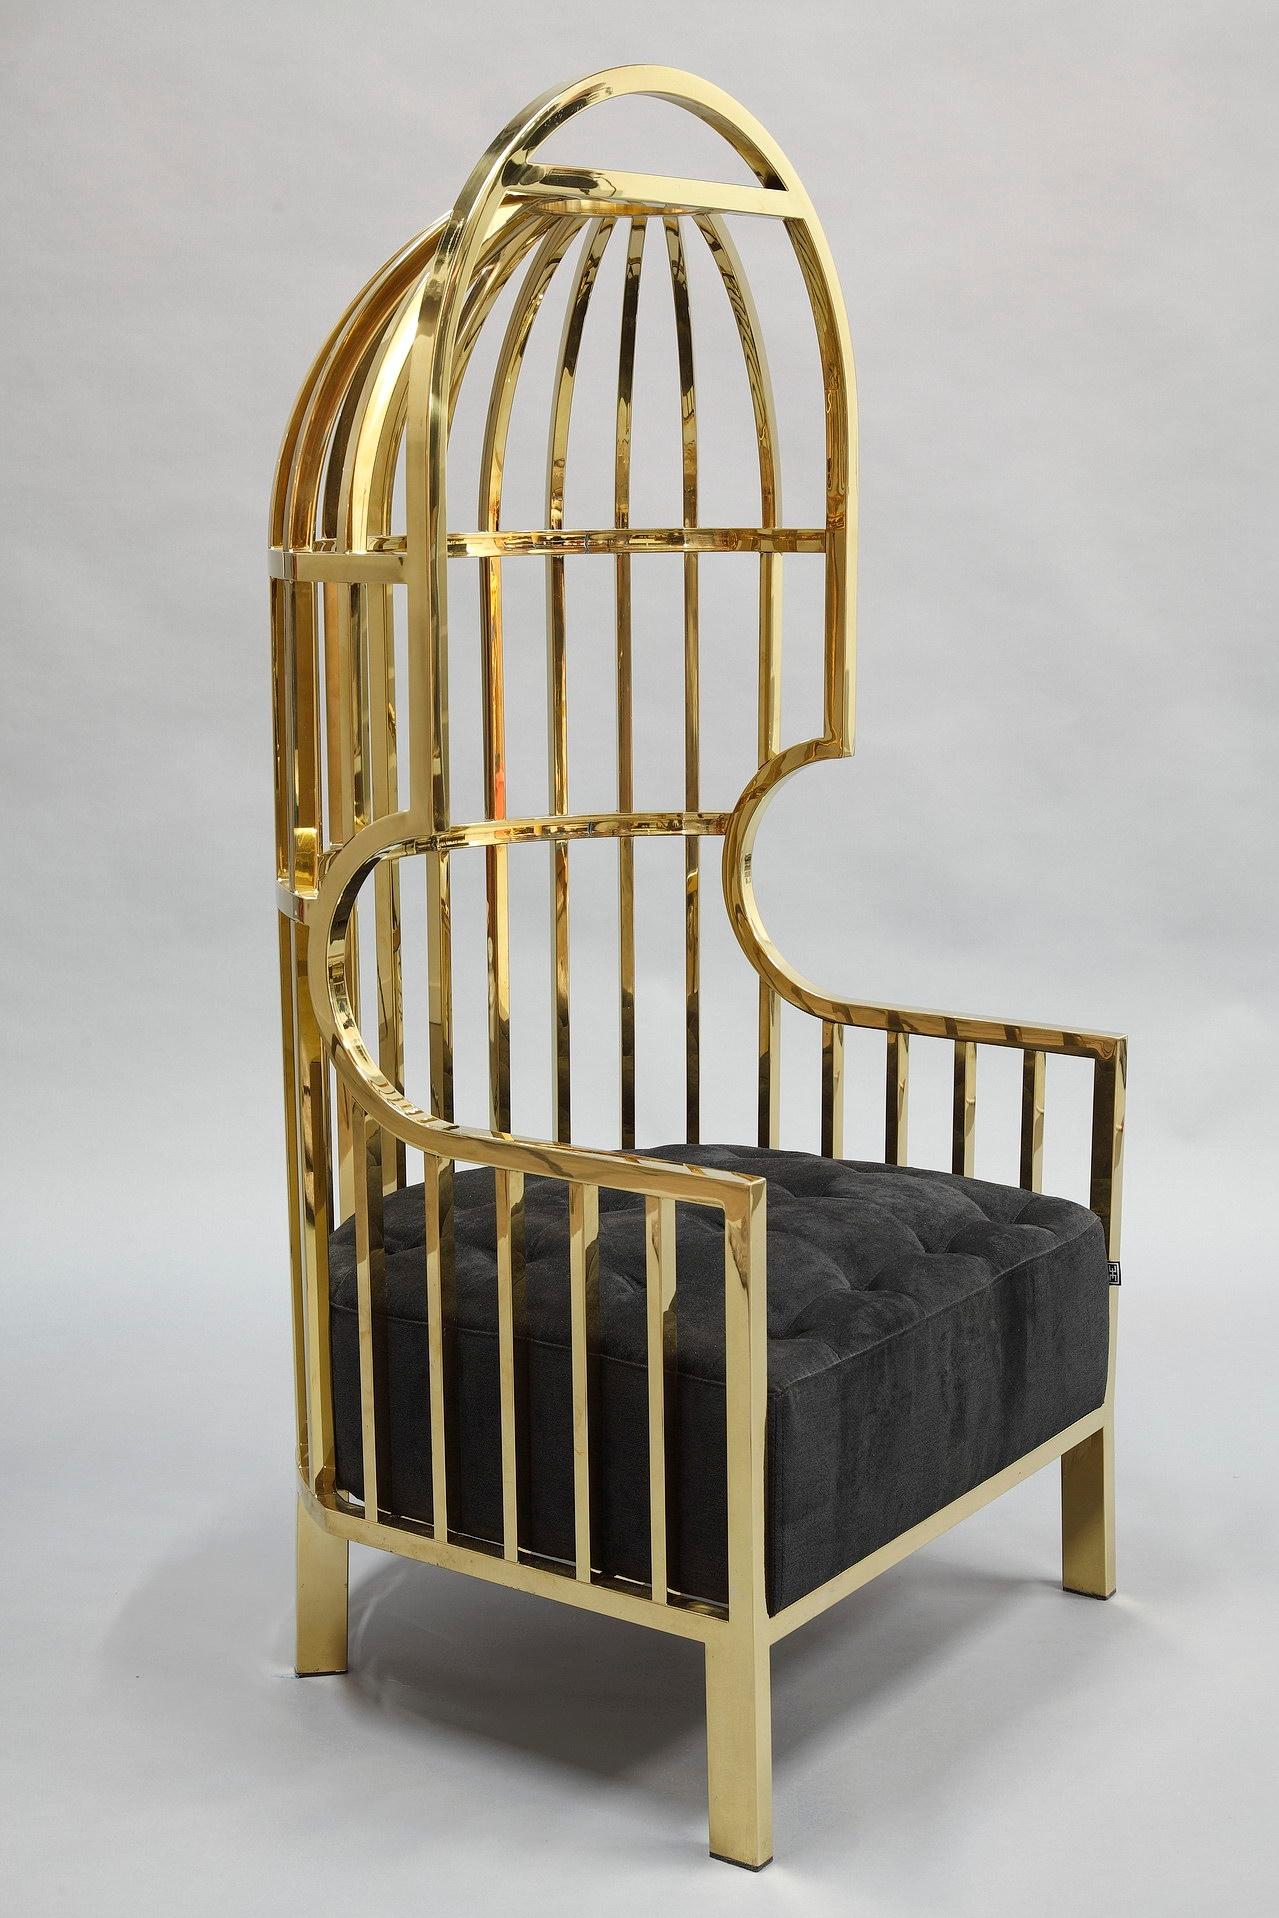 Astonishing Bora Bora chair with gold finished stainless steel cage featuring a velvet quilted button black seat pad. Combining luxury and glamour, this high-end chair is a modern translation of famous Classic designs. Its design is inspired by the